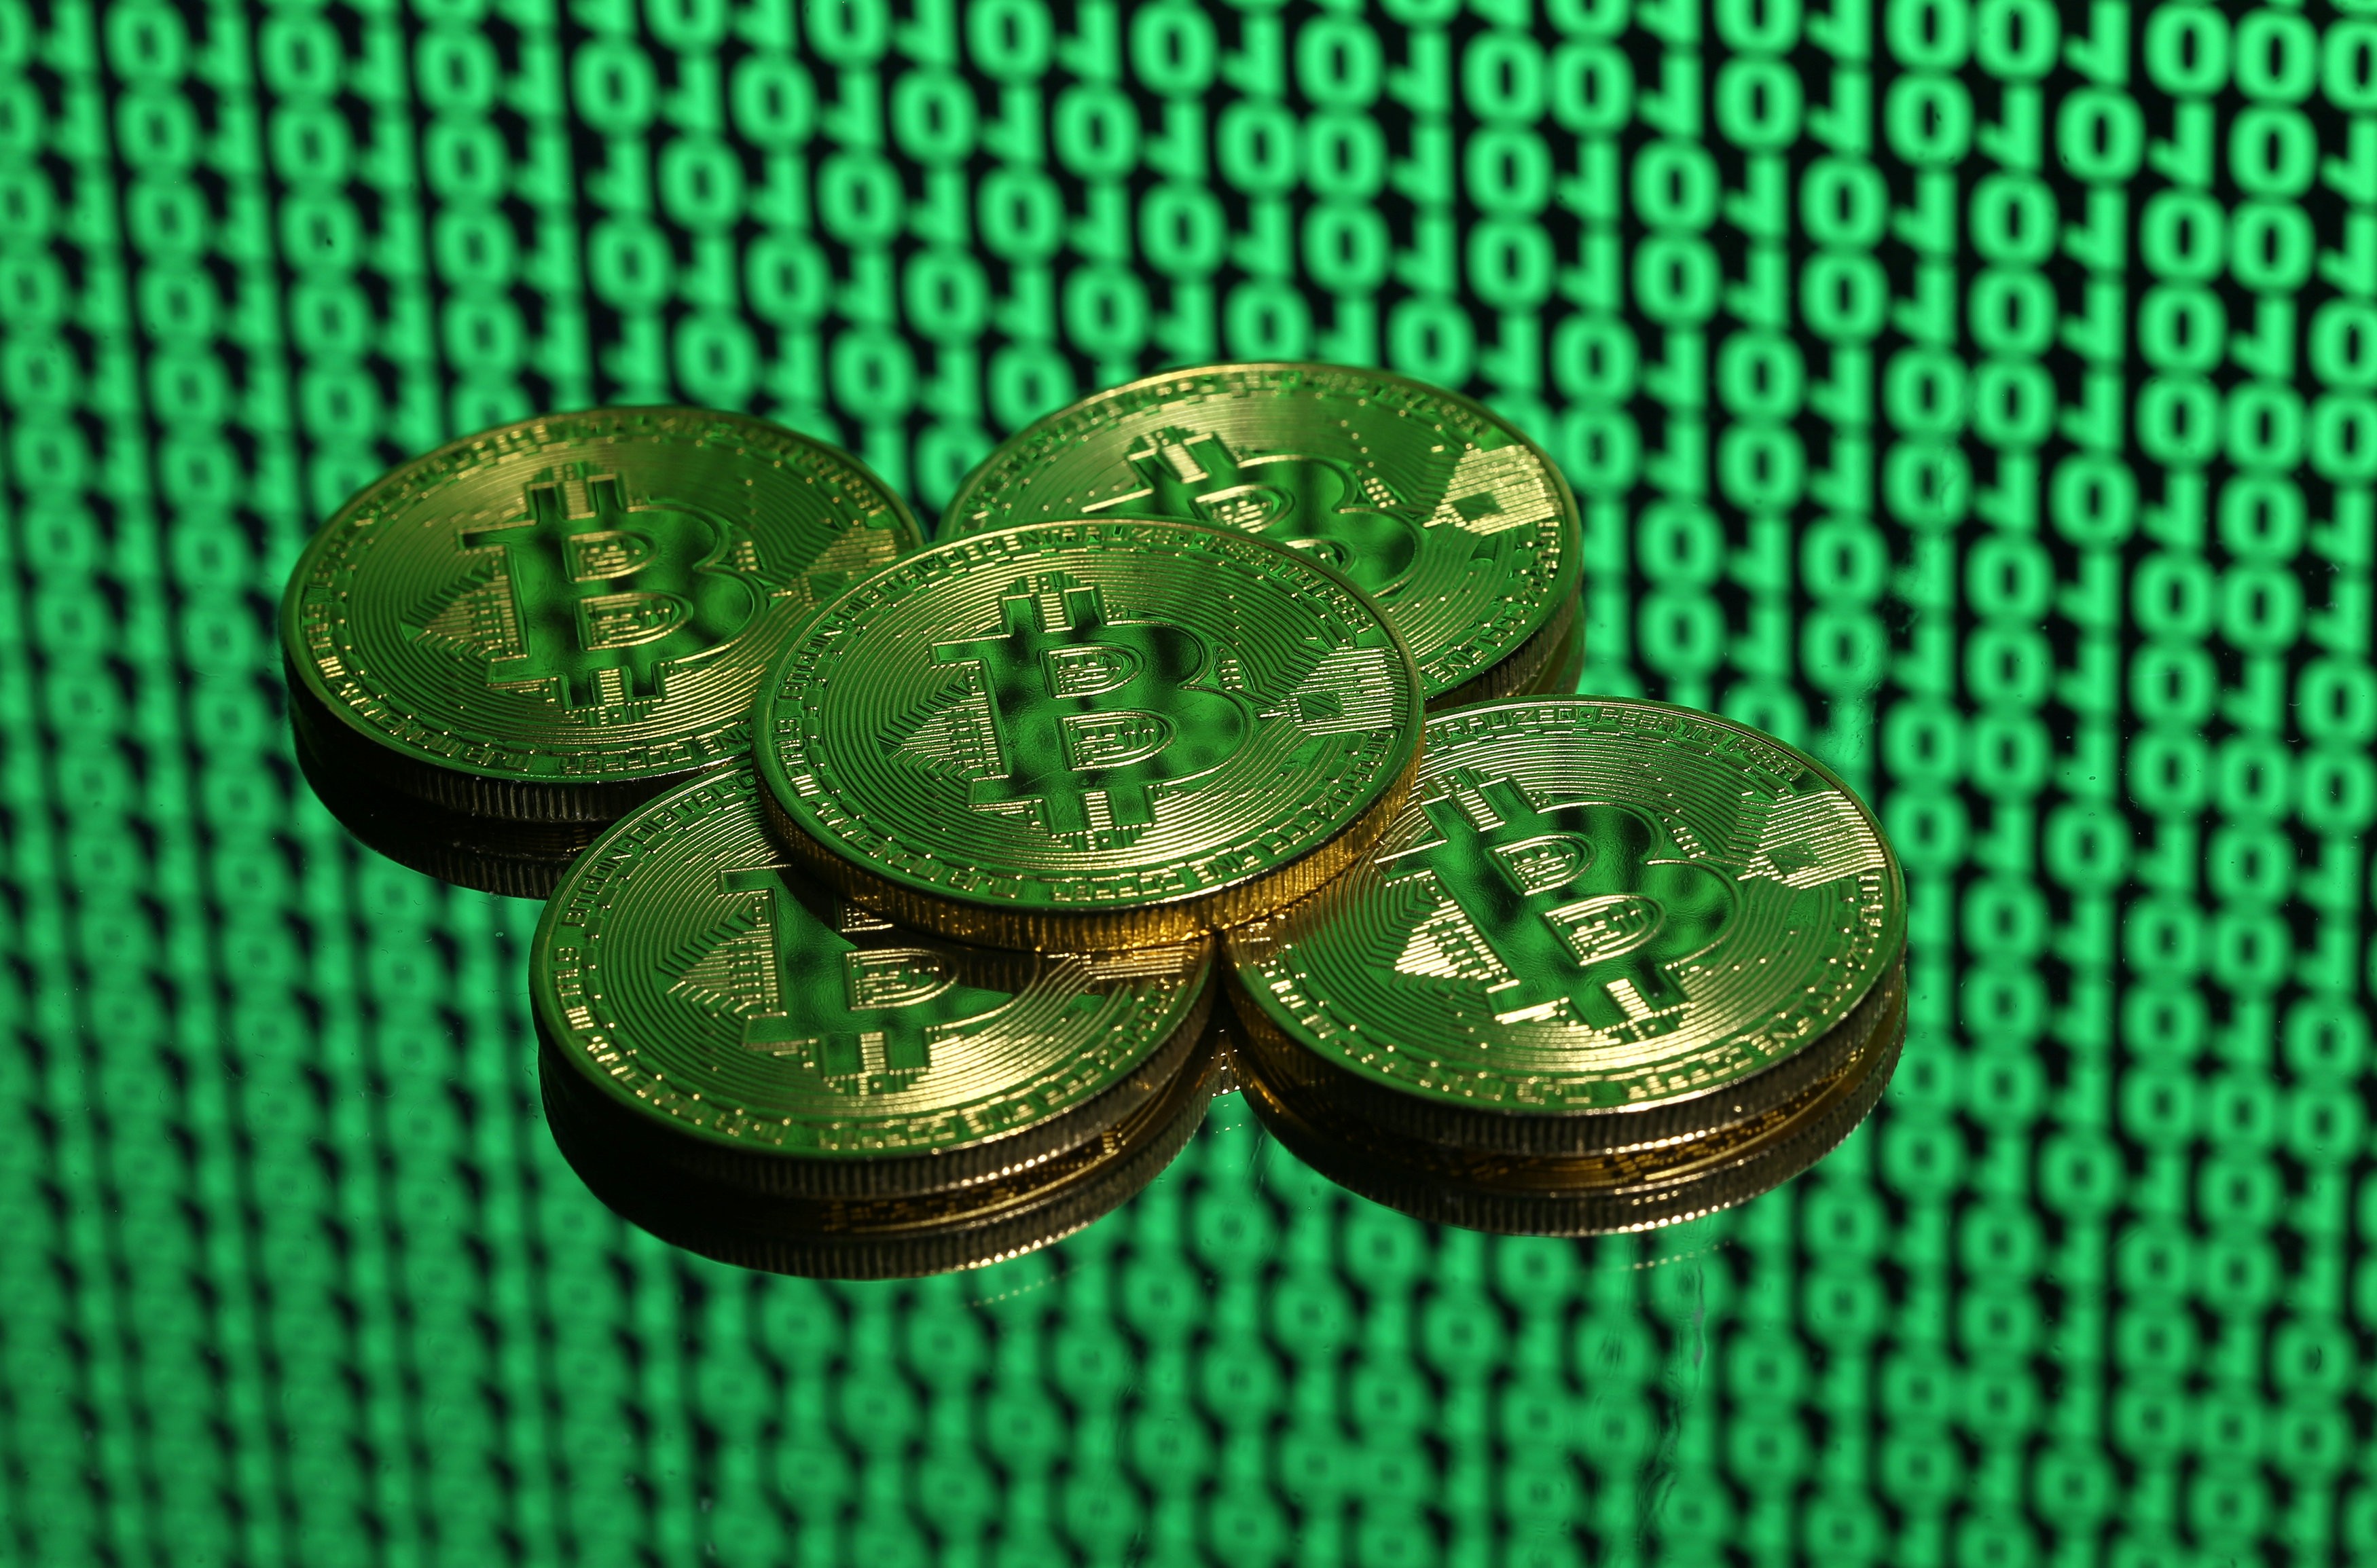 Tokens of the cryptocurrency bitcoin placed on a monitor displaying binary digits. Even if regulatory changes in the US do deflate the bitcoin bubble, they will not halt this financial revolution. Photo: Reuters